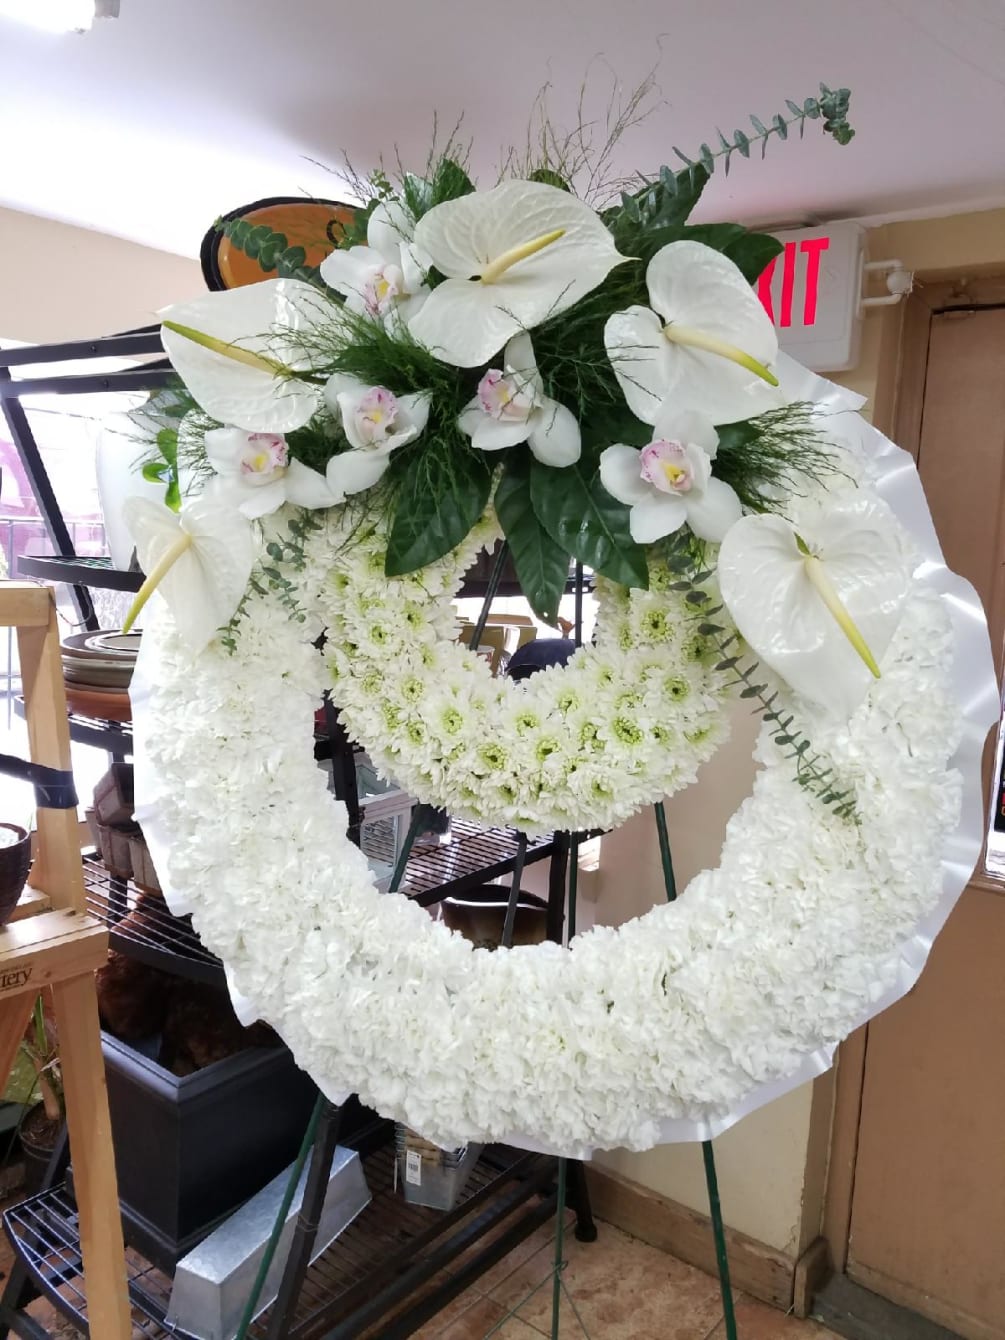 This special and unique standing wreath symbolizes ones eternal love.
A contemporary tribute